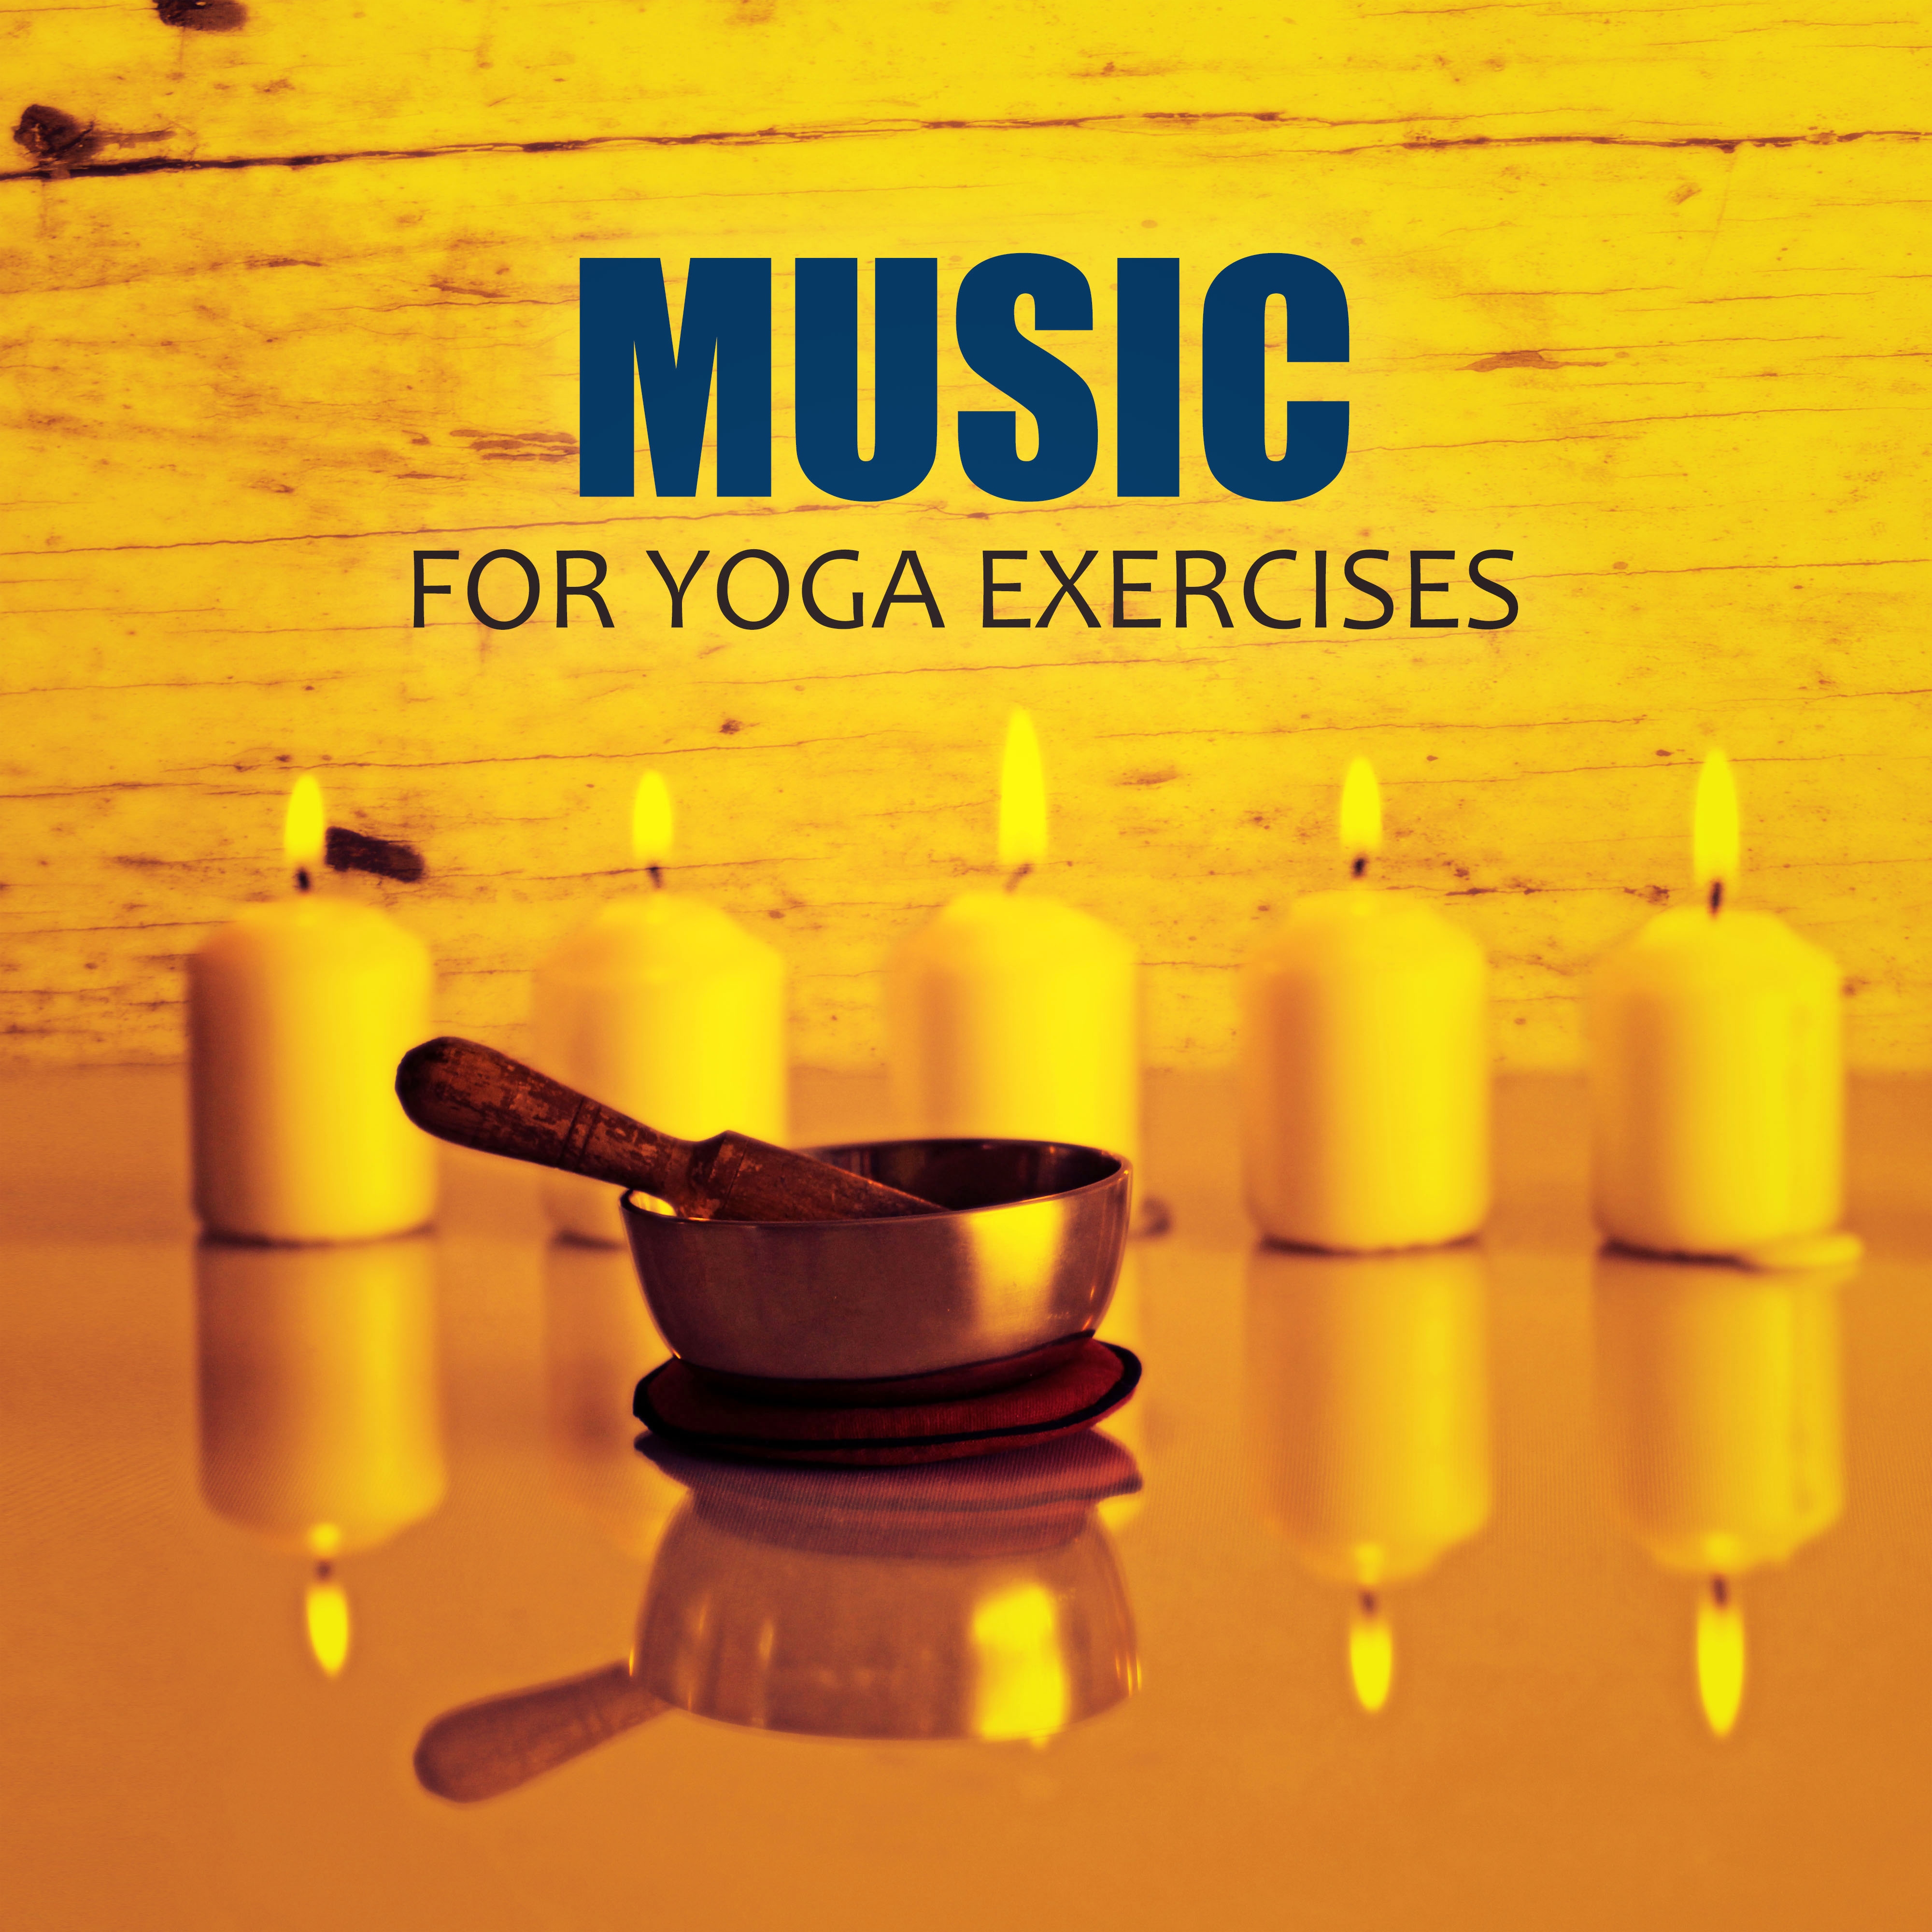 Music for Yoga Exercises  Deep Meditation Music, Connect Your Body, Mind and Soul, Sensual Sounds for Yoga Exercises, Soft Nature Sounds